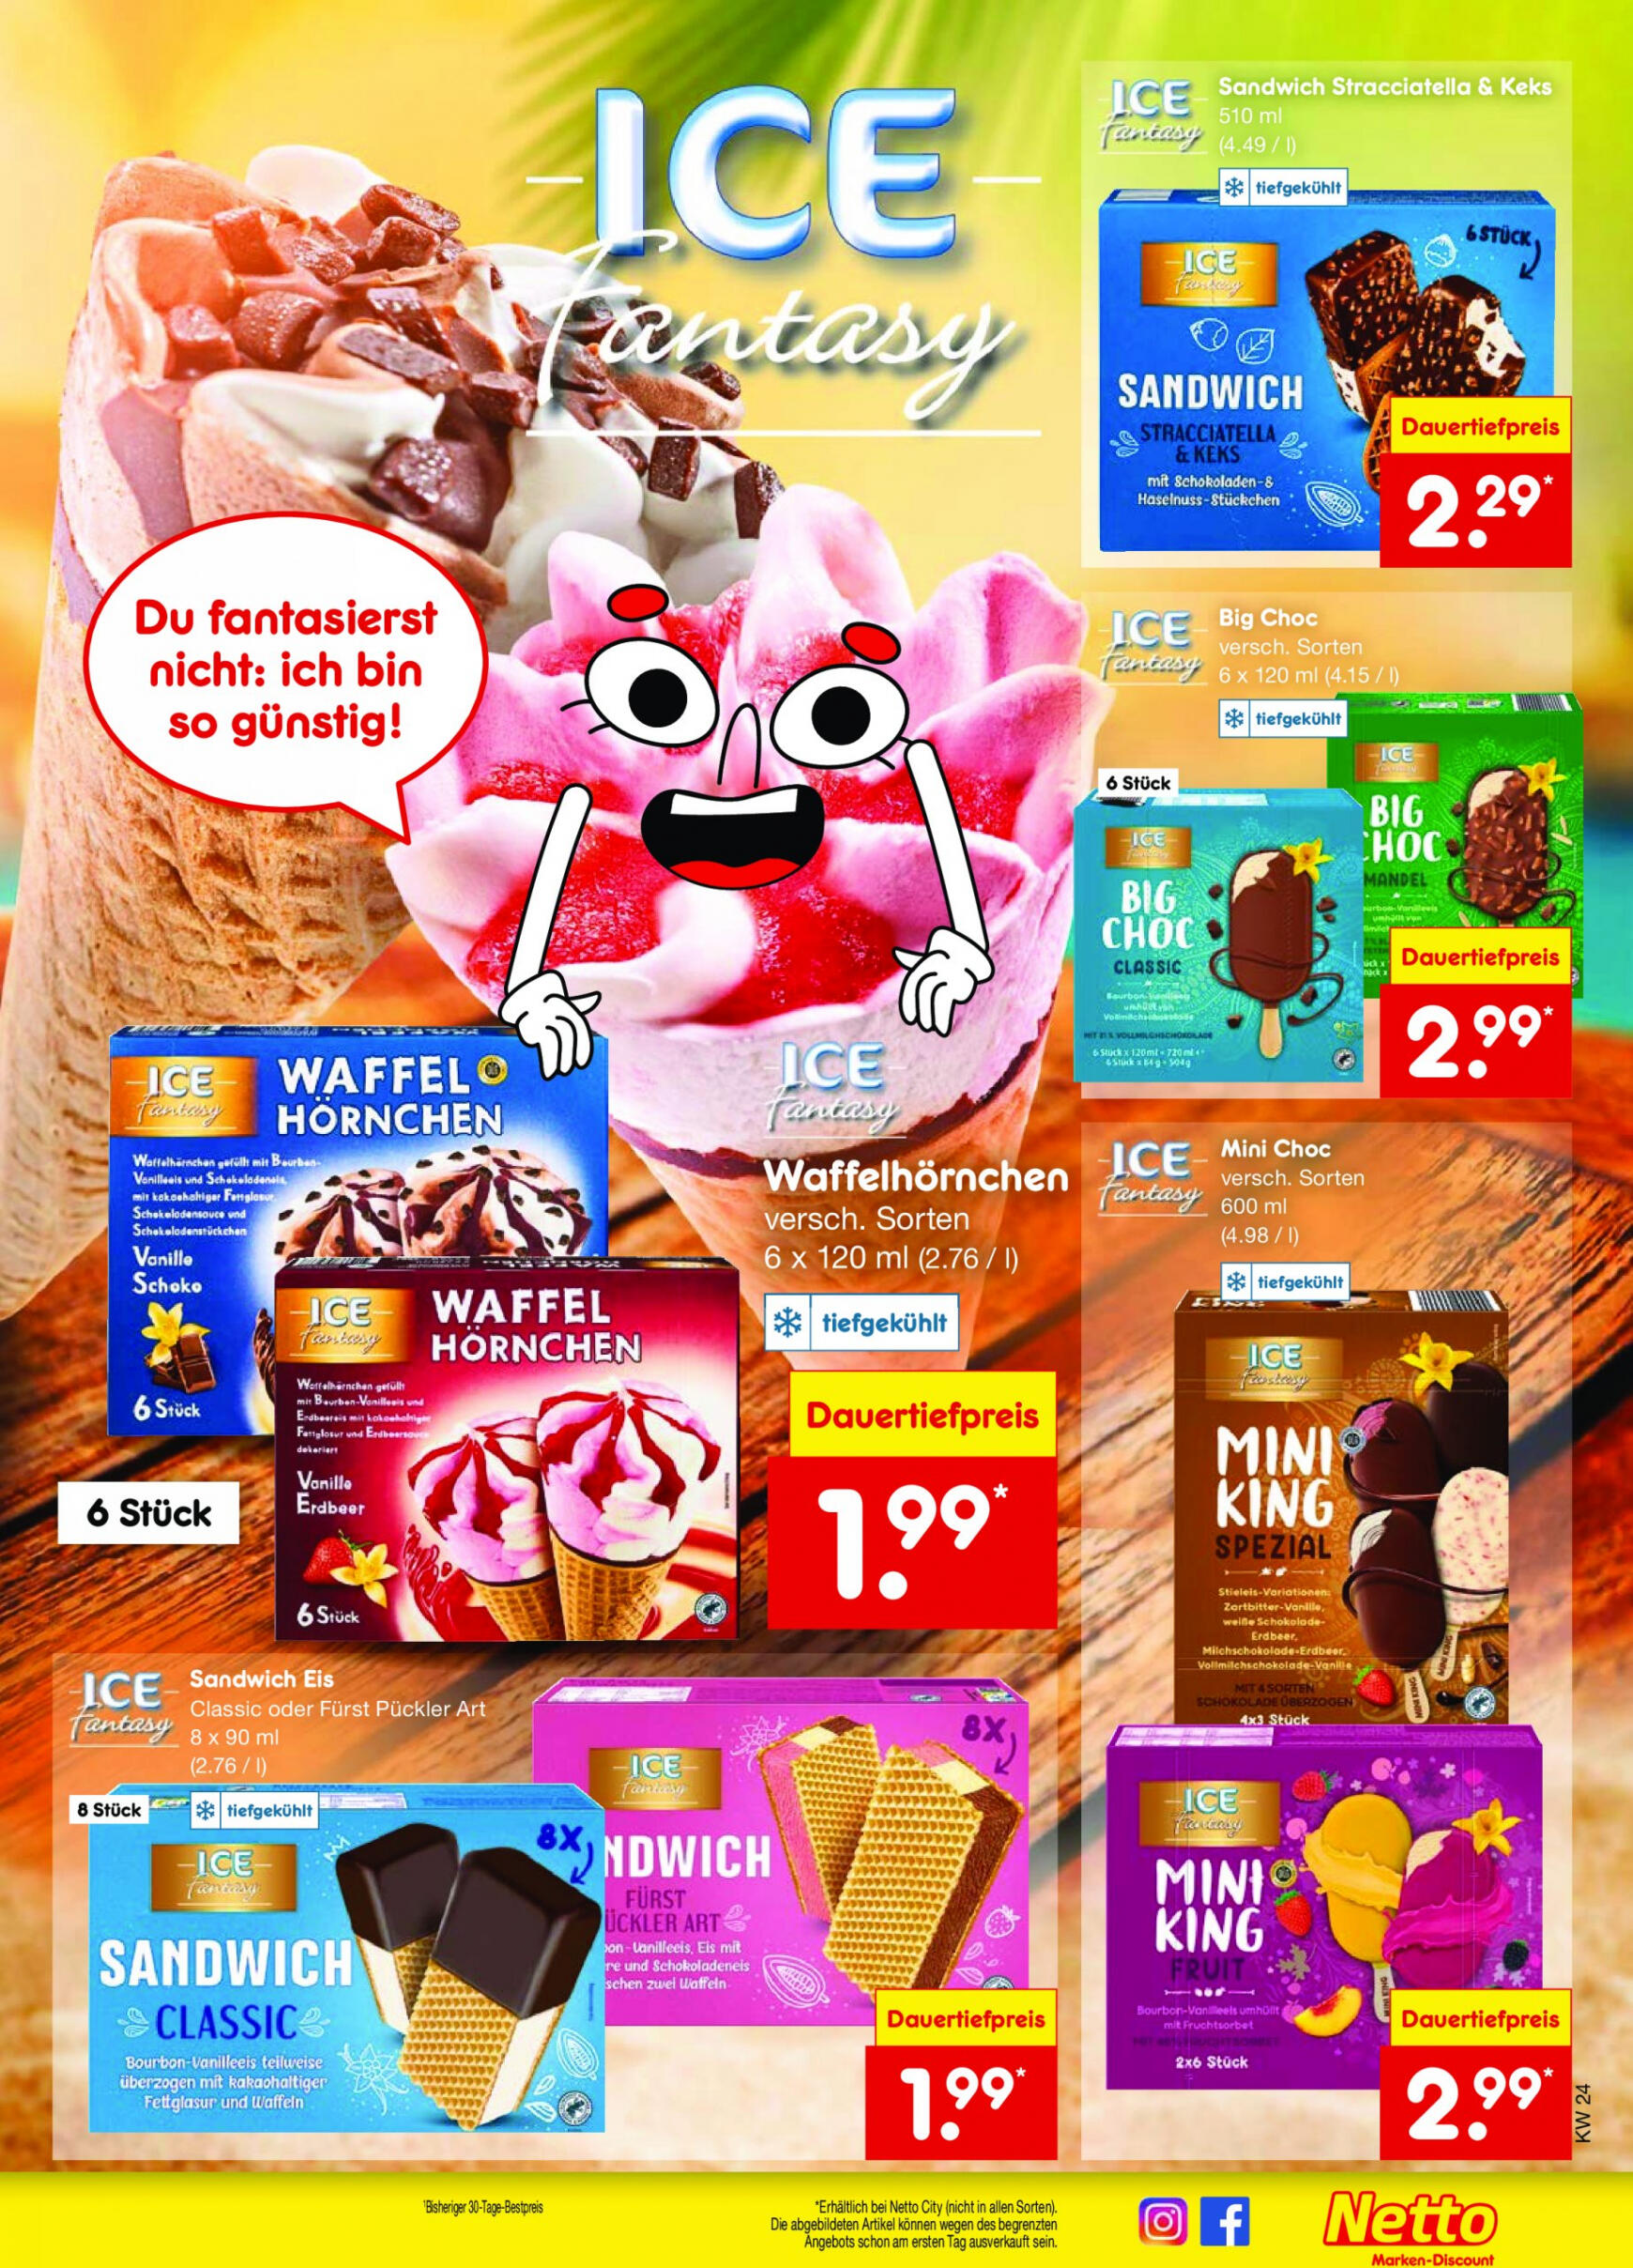 netto - Flyer Netto aktuell 10.06. - 15.06. - page: 27